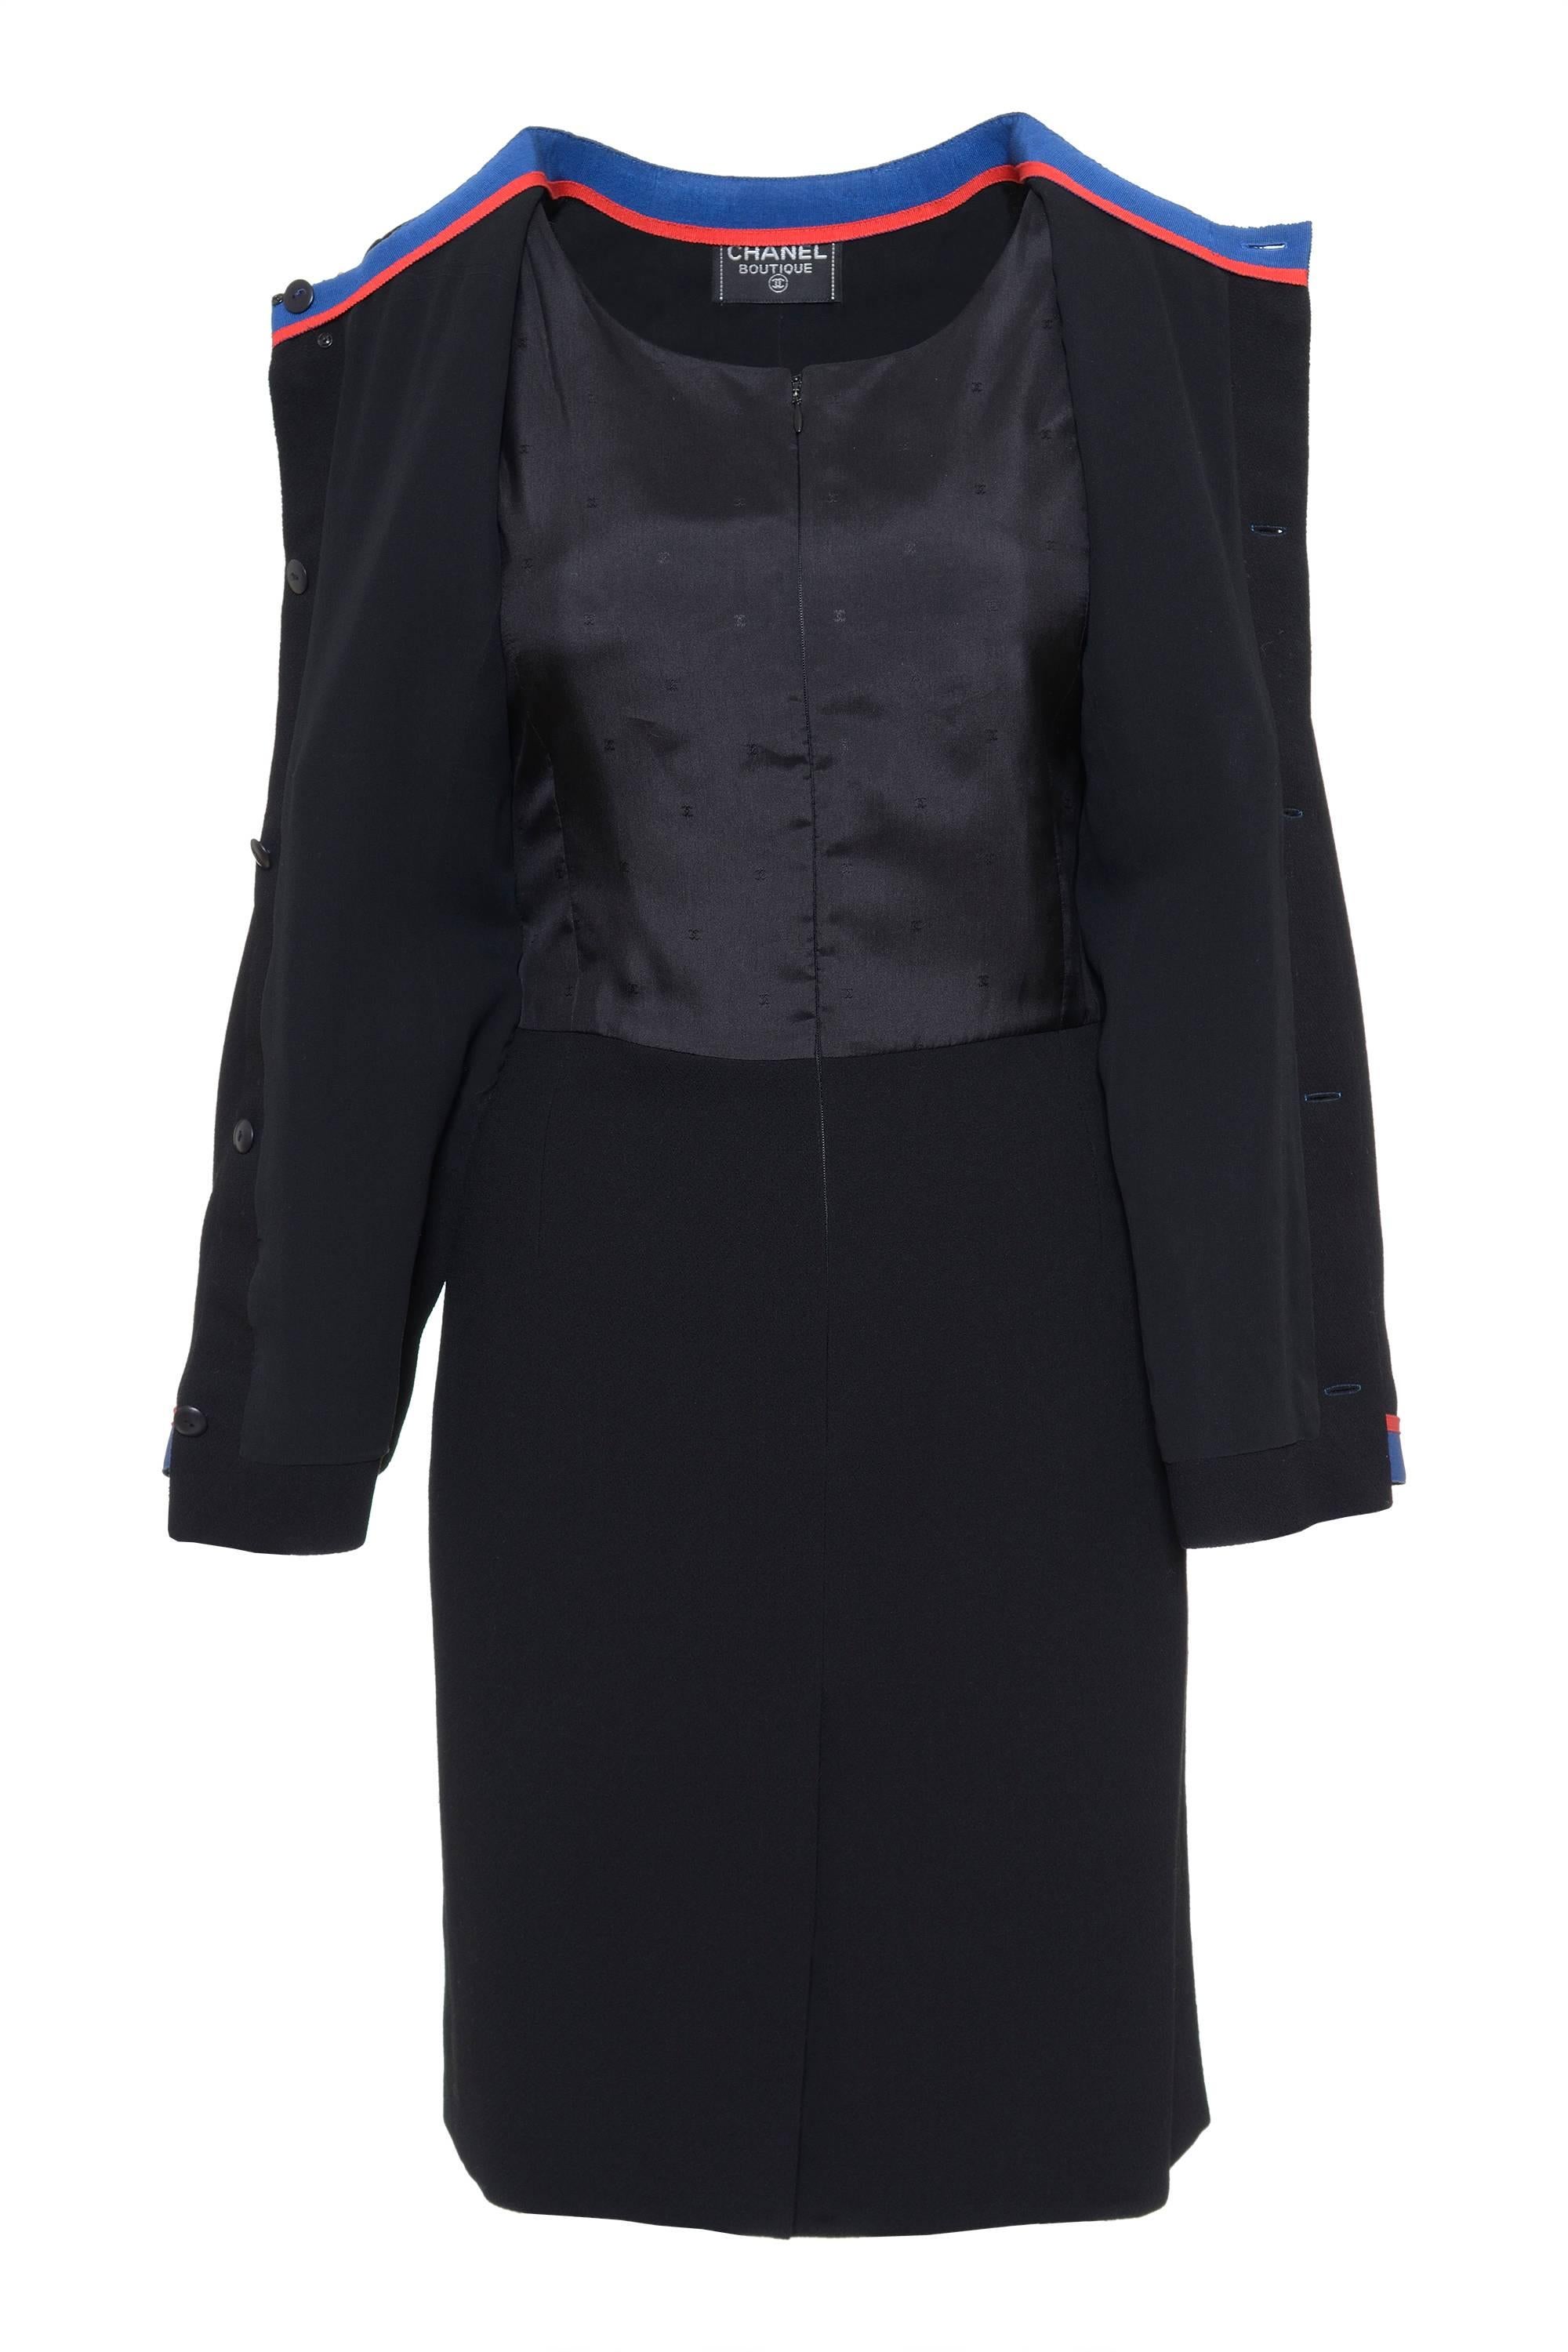 This navy style dress has a round neckline, blue and red details on the collar, pockets, jacket hems and cuffs, front gold buttons, two frontal square pockets, buttoned frontal closure, two-piece sleeves with button, pencil skirt, front and back